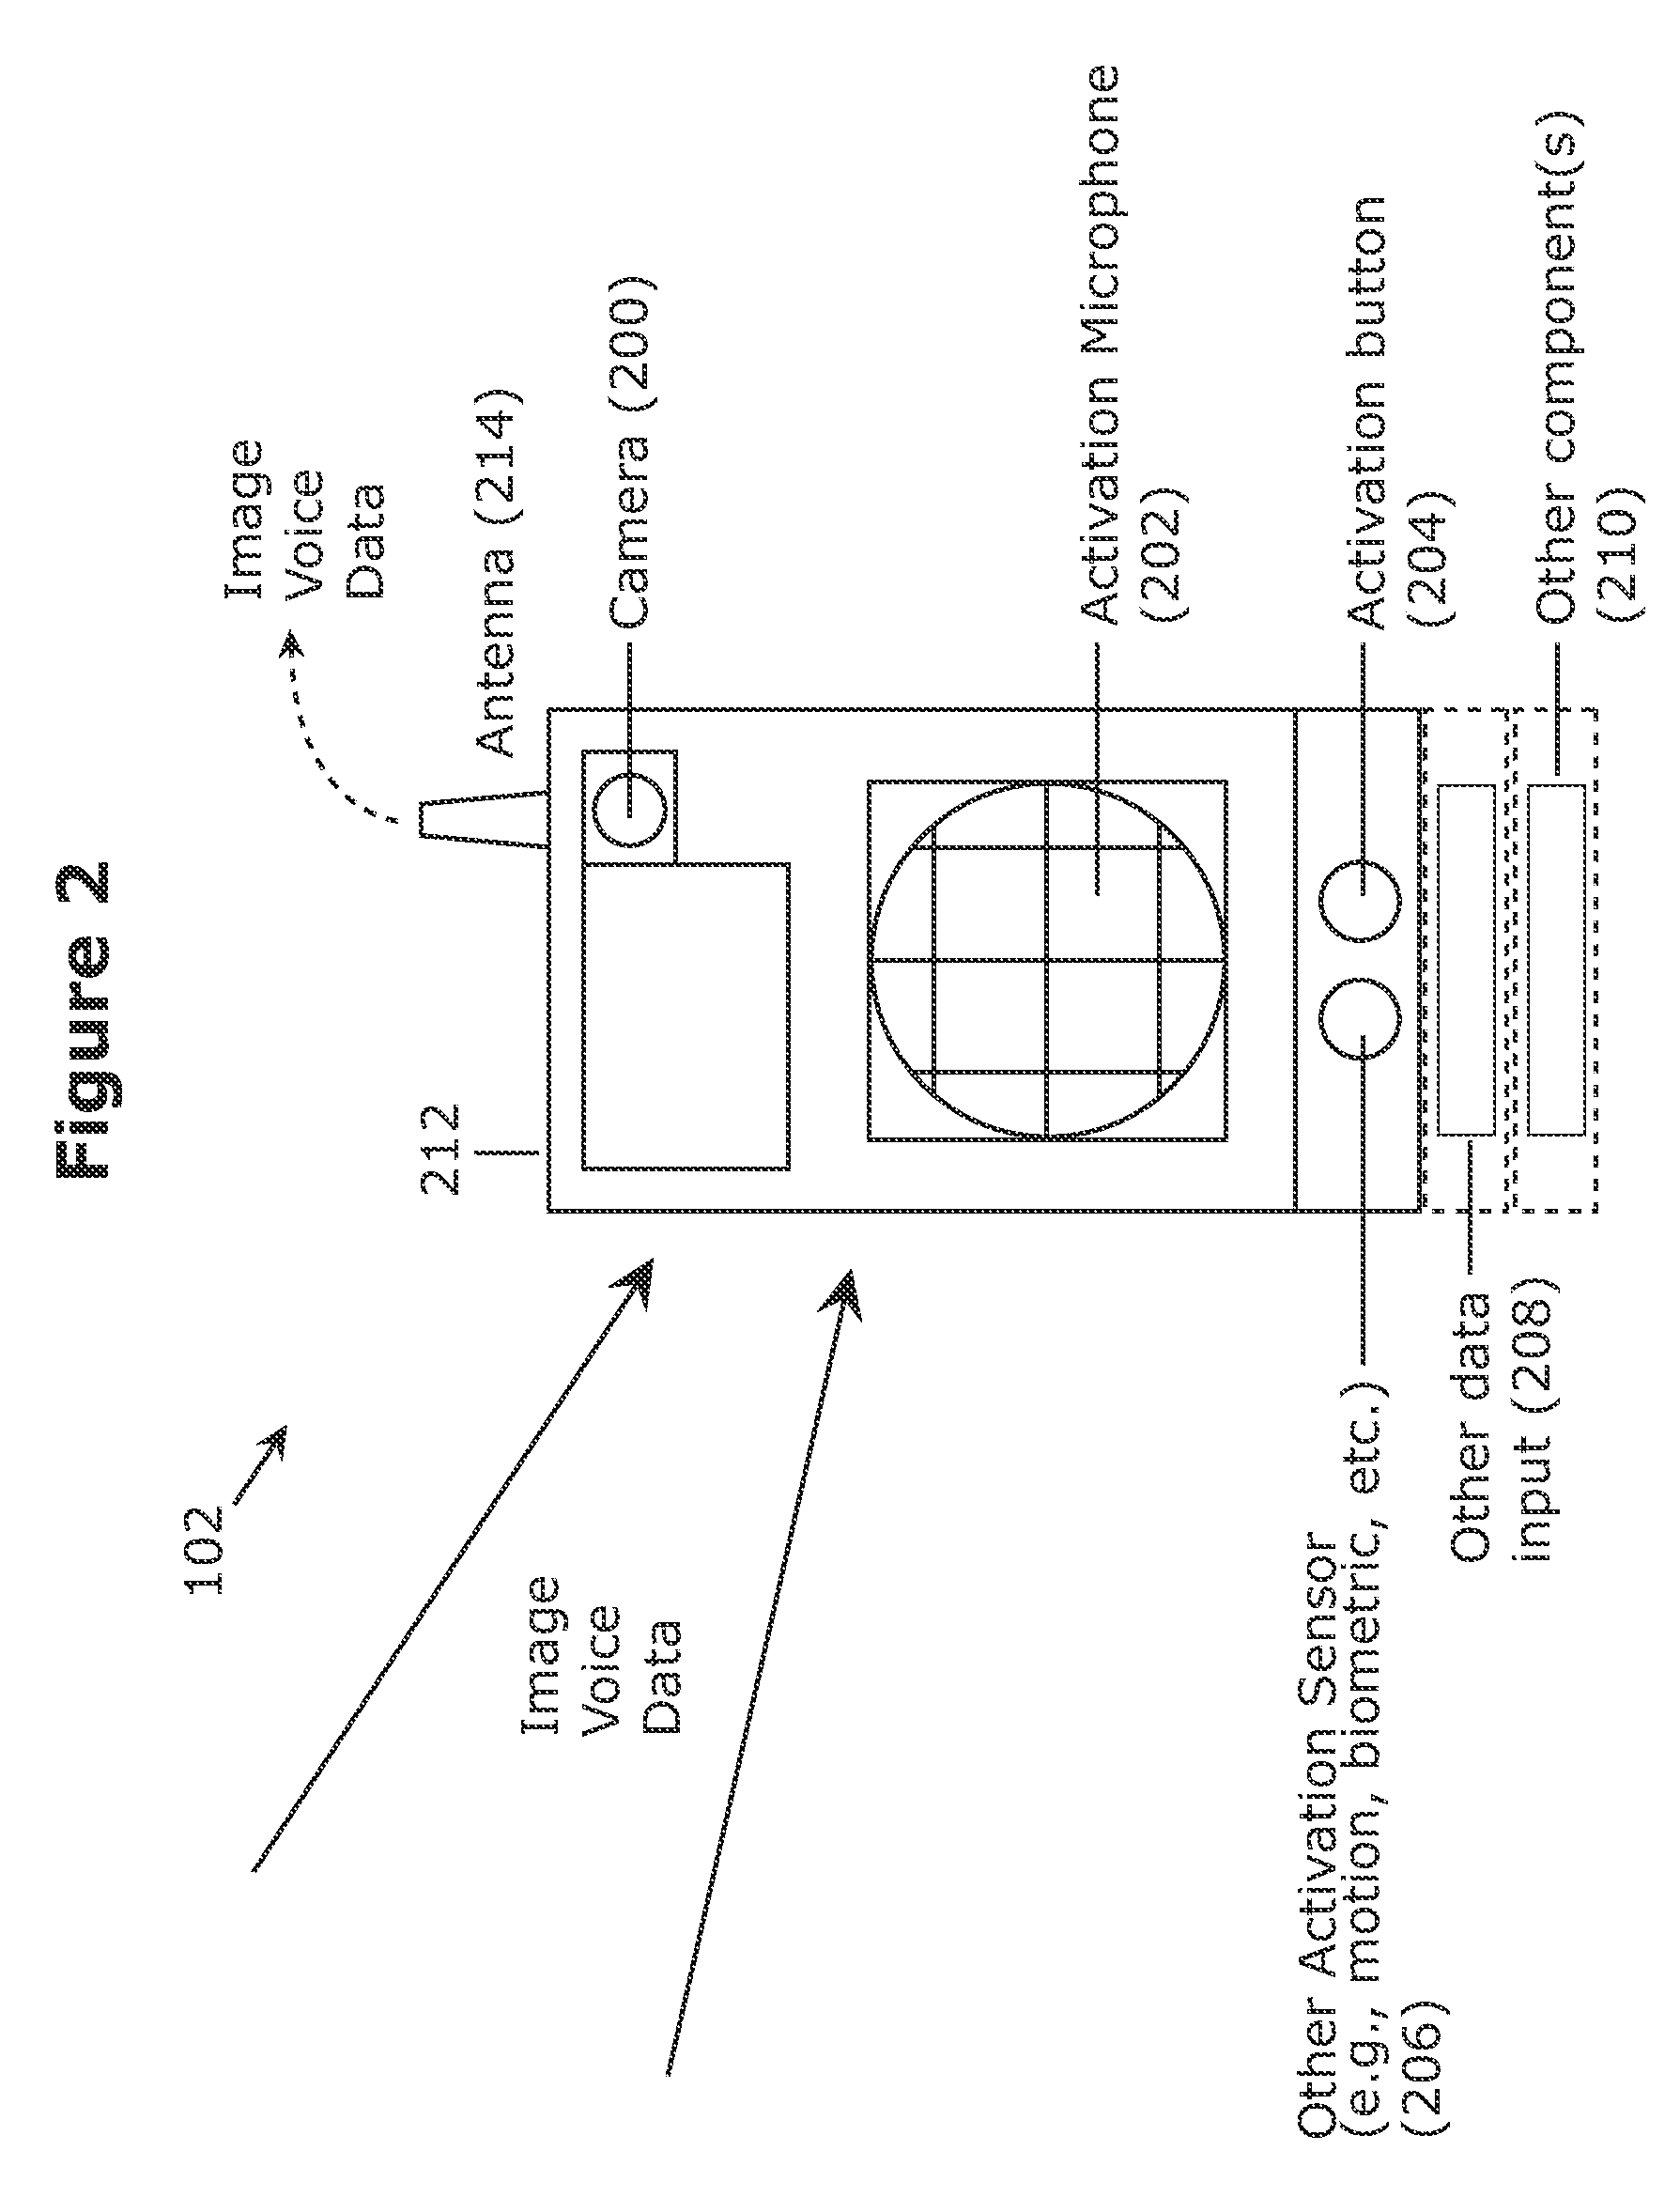 Personal safety system, method, and apparatus